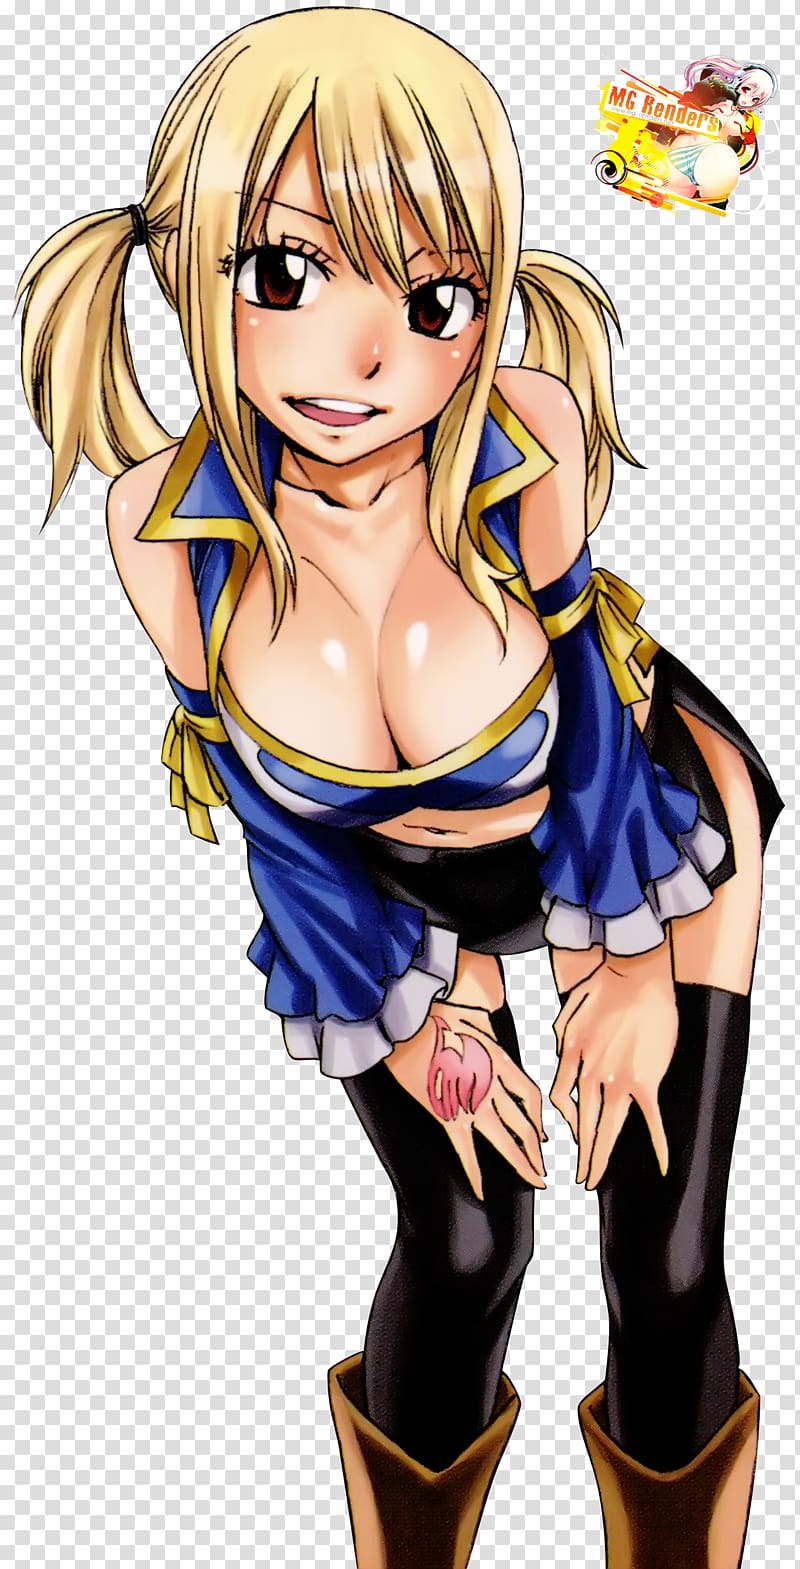 Lucy Heartfilia Natsu Dragneel Juvia Lockser Erza Scarlet Fairy Tail, fairy tail transparent background PNG clipart